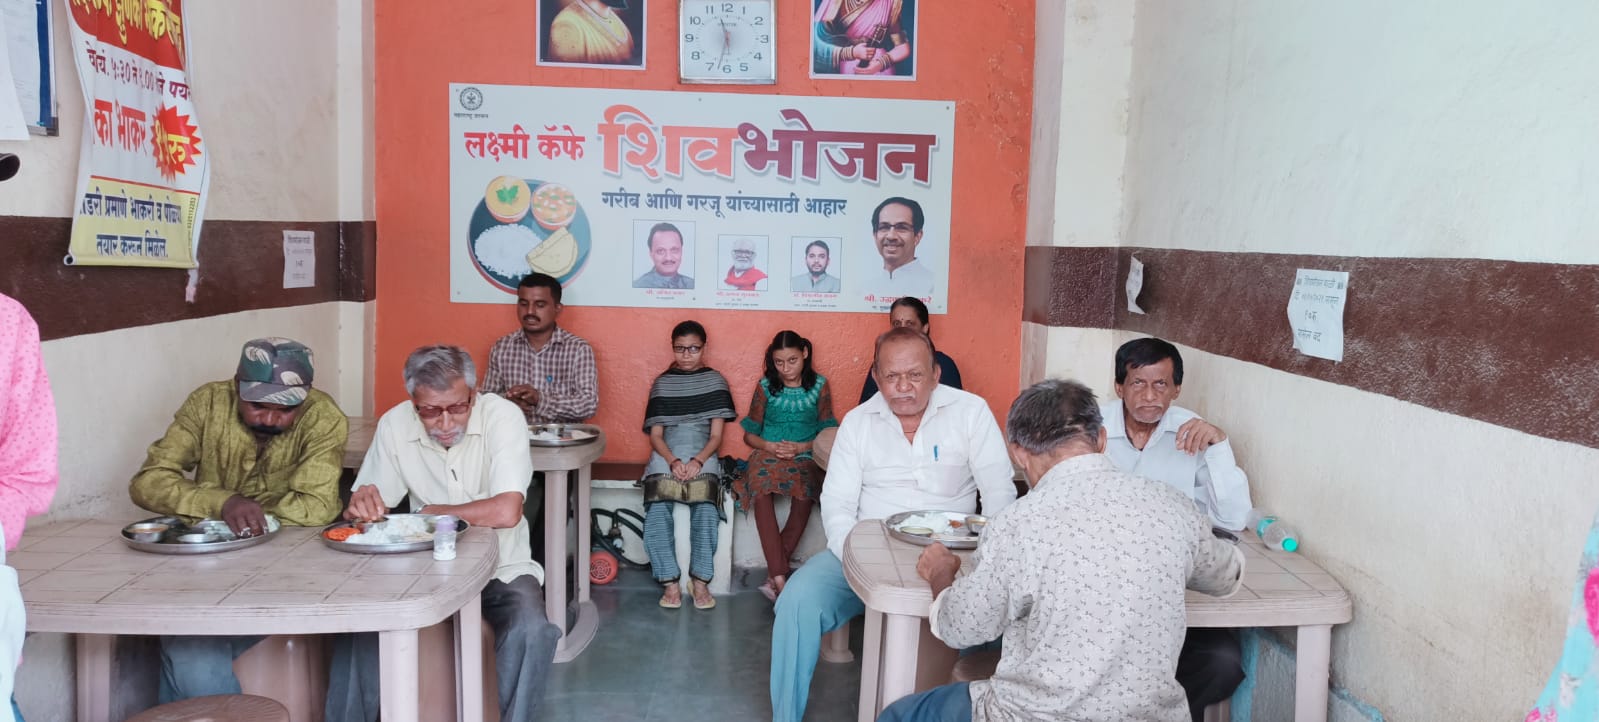 Anil Gote's birthday Public service activities in Dhule